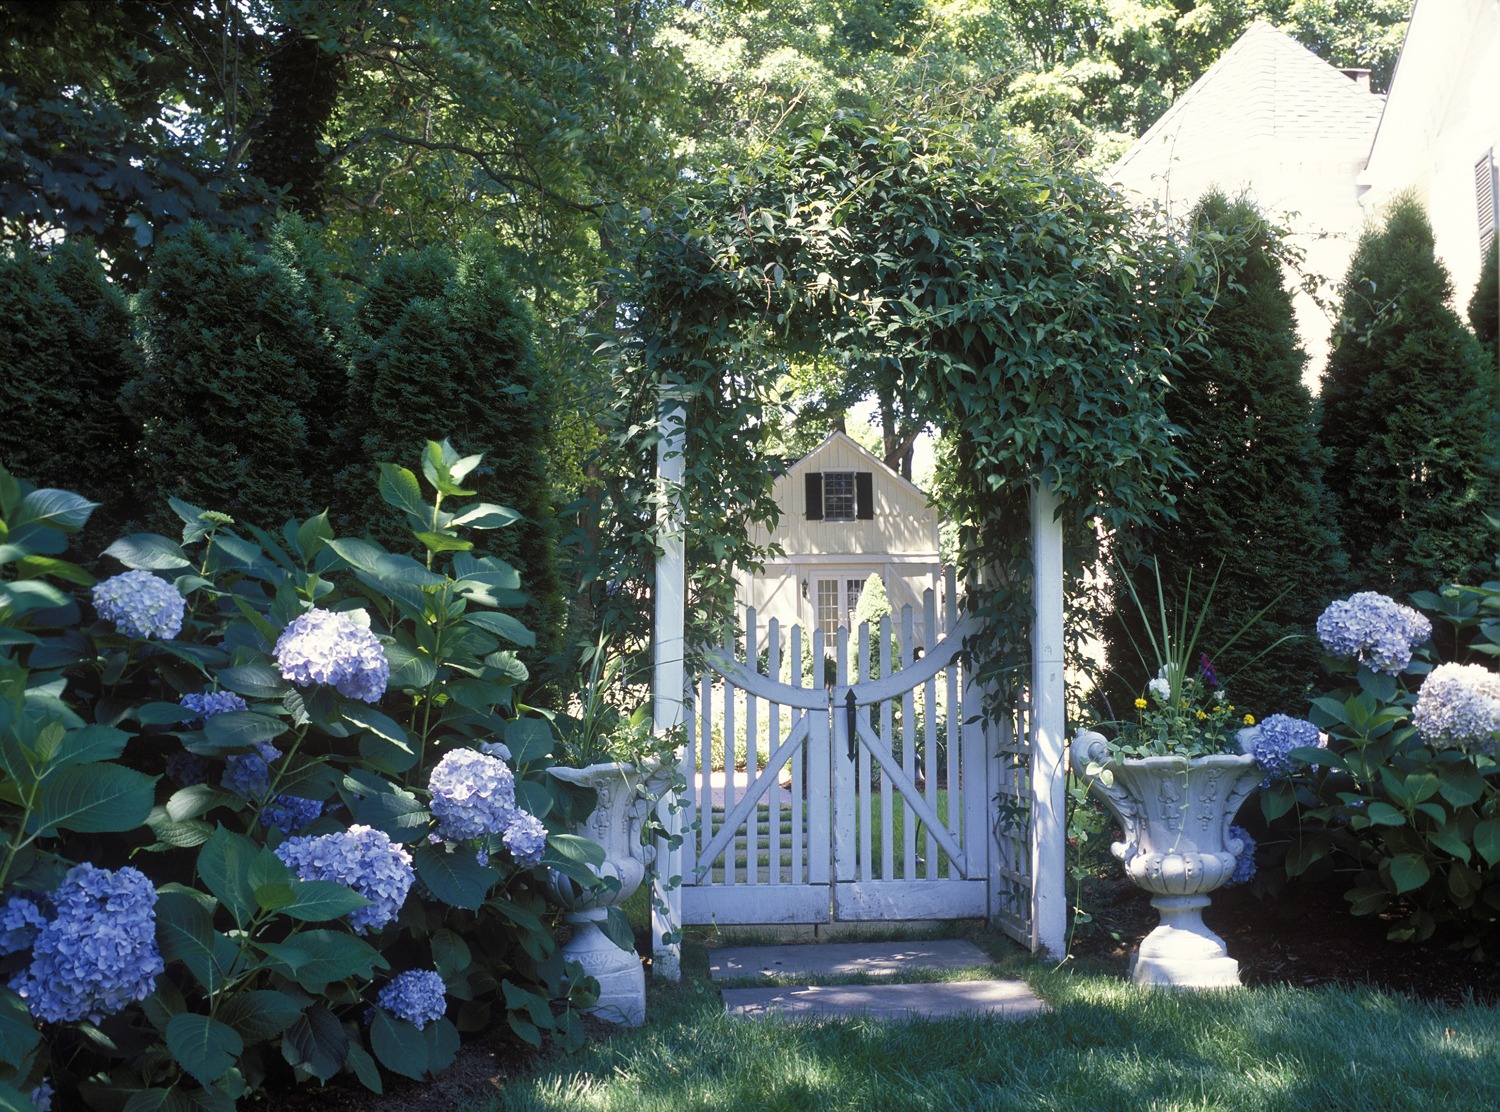 A charming garden gate flanked by lush hydrangeas and ivy-covered arches leads to a yard with a quaint, pale house in the background.